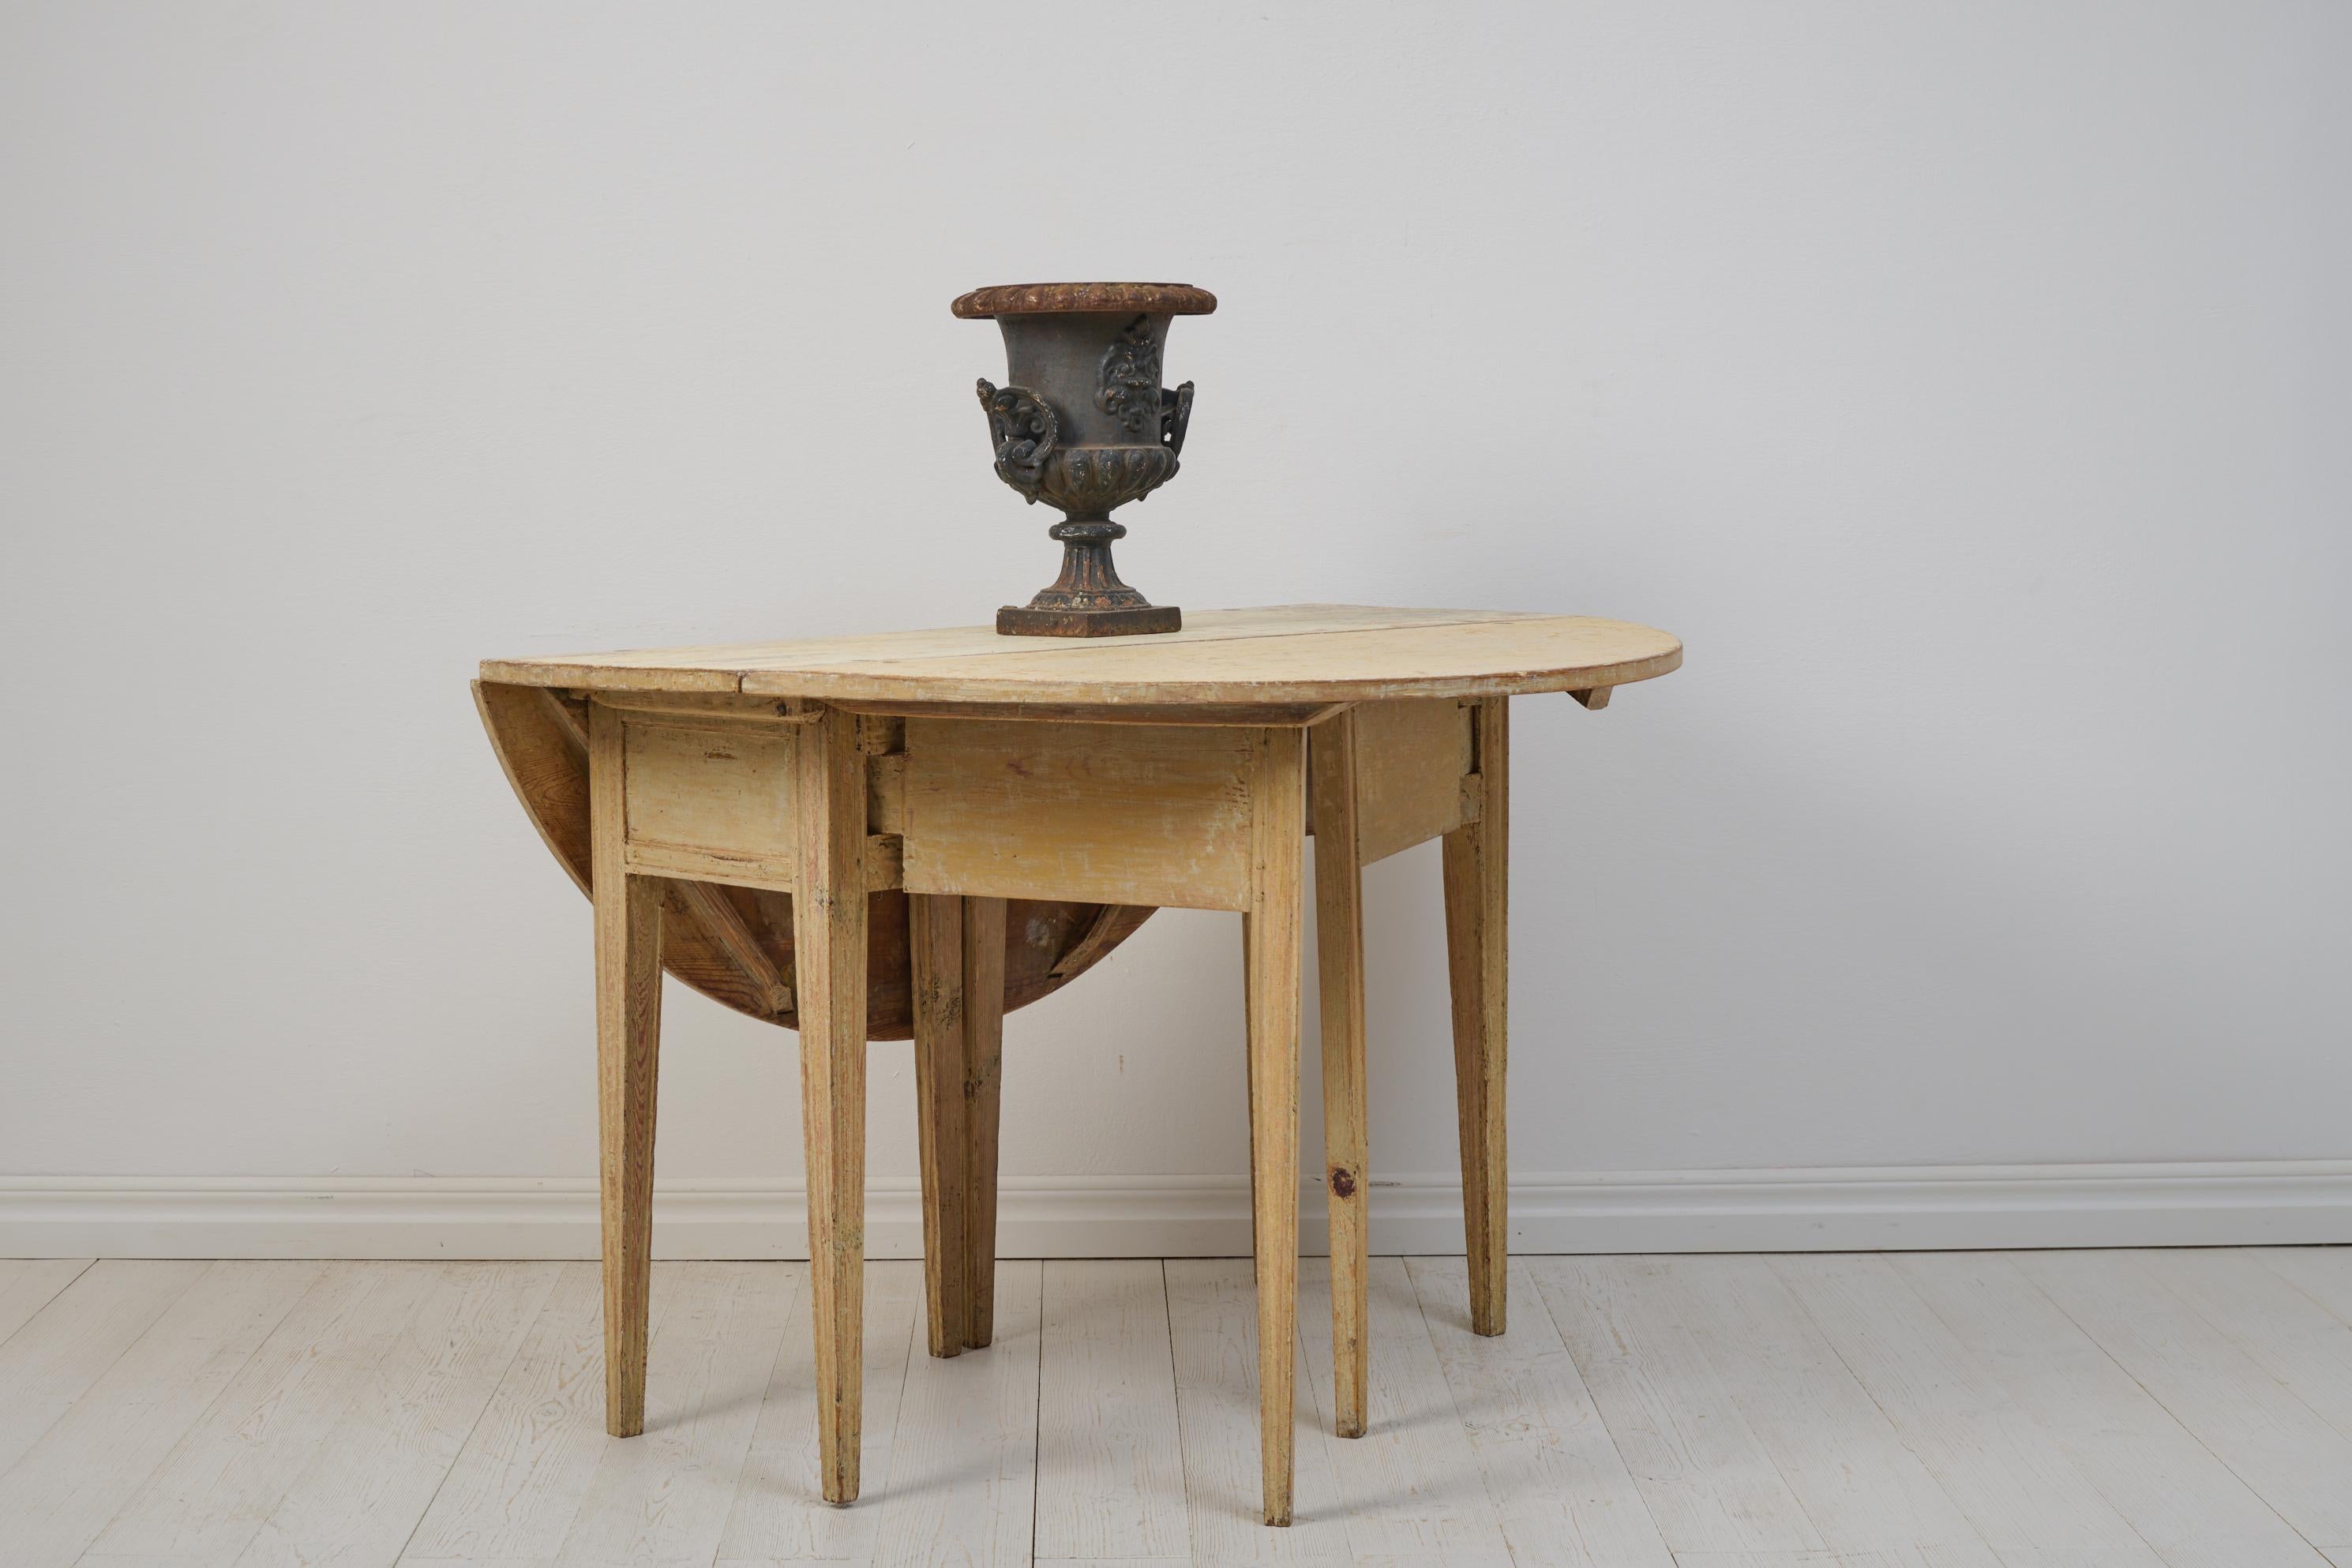 Antique Genuine Swedish Gustavian Pine Distressed Patina Drop-Leaf Table In Good Condition For Sale In Kramfors, SE